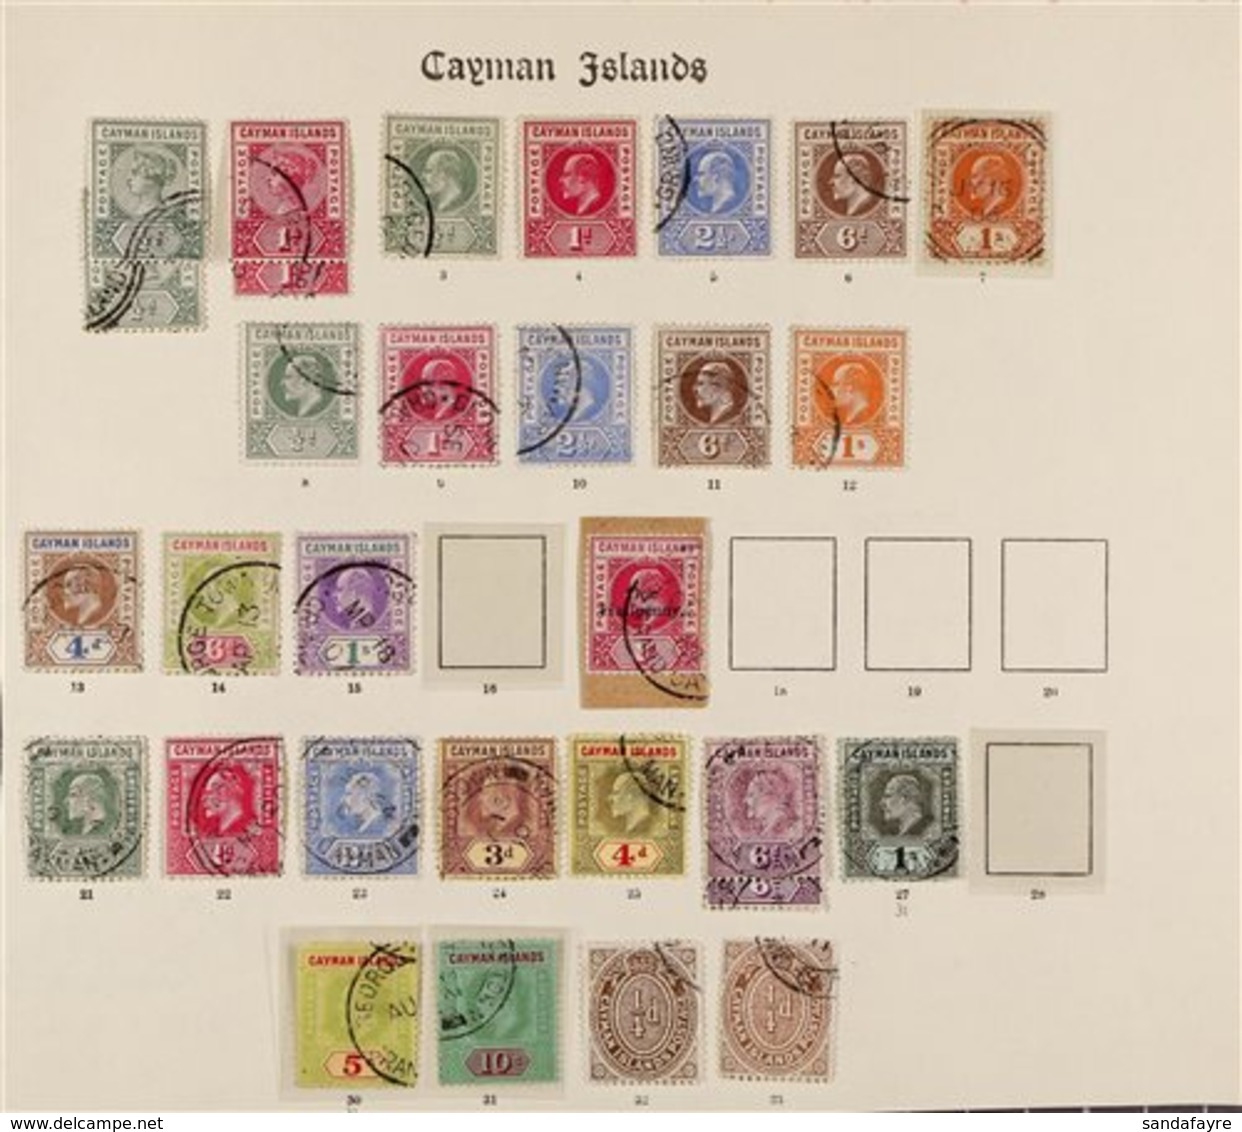 1900-1909 VALUABLE OLD TIME FINE USED COLLECTION.  An Attractive Collection Presented On Part Of An "Imperial" Album Pag - Cayman Islands